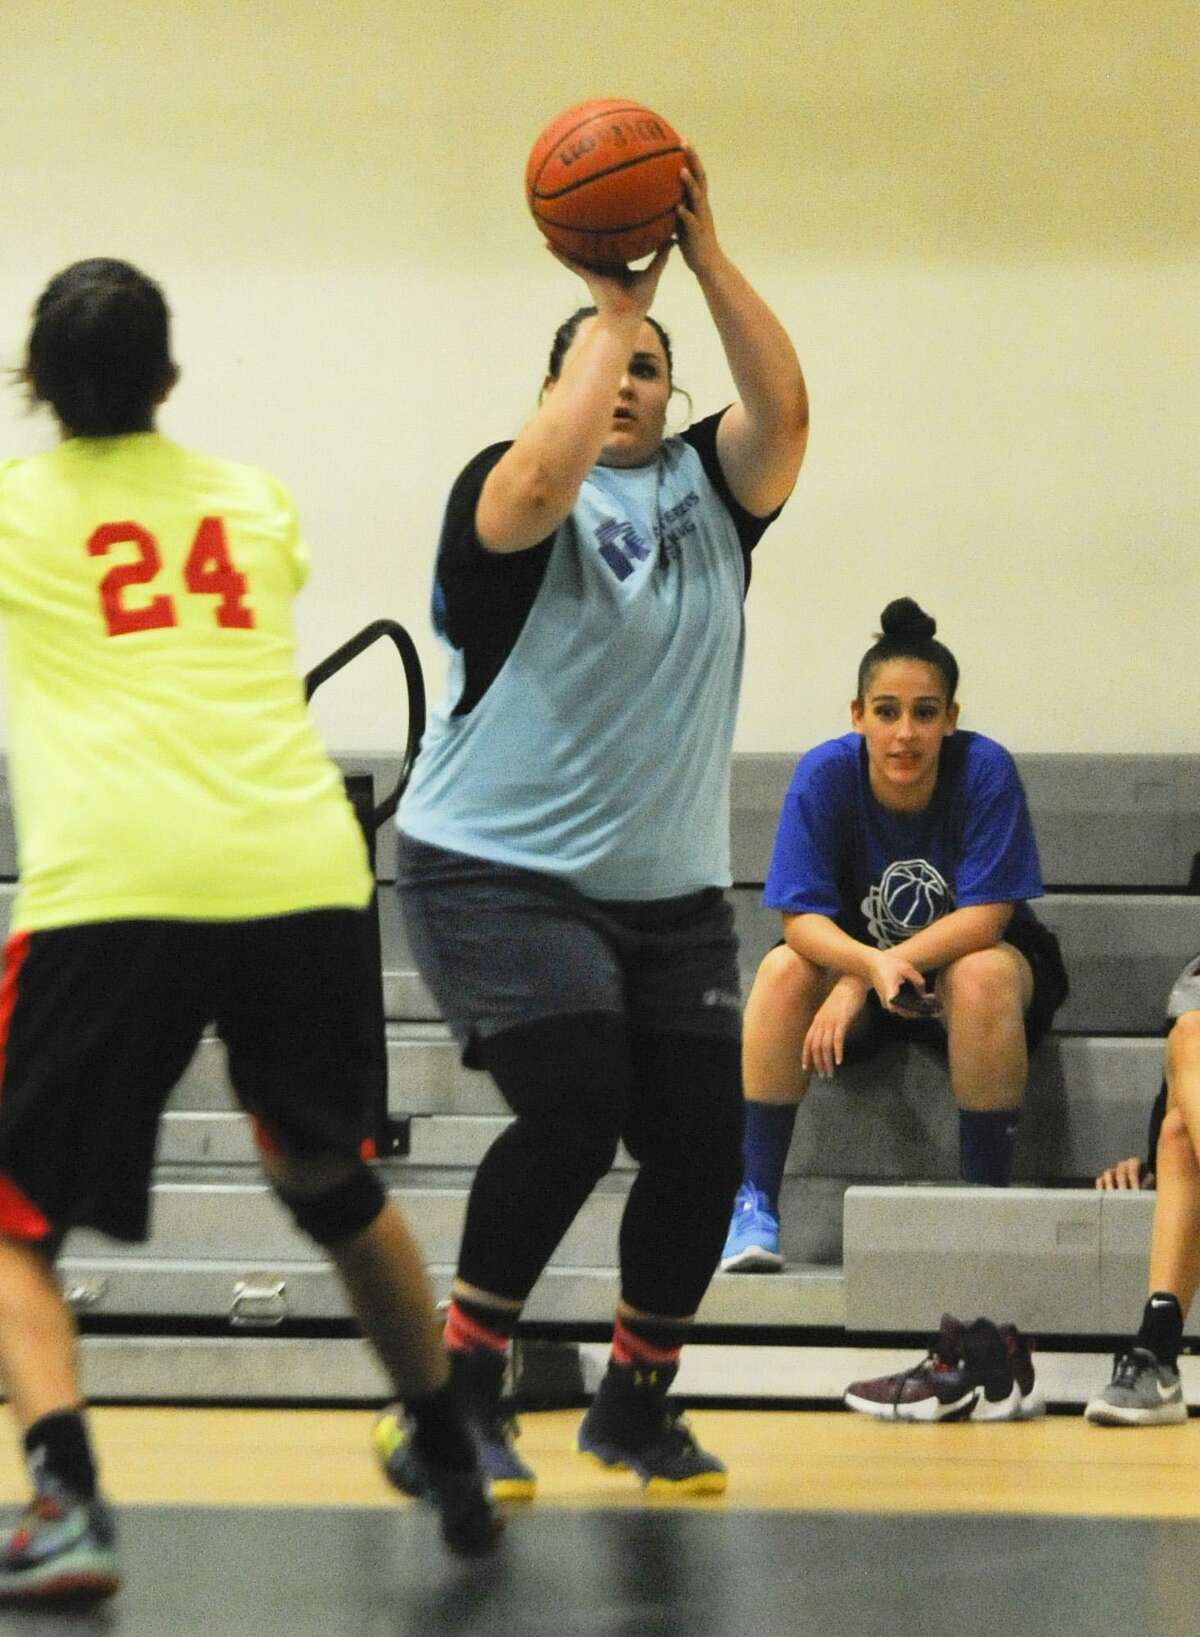 In a second-place battle in the women's division of the Adult Basketball League last week, the Animosity defeated the Old Stars 49-46 to move to 6-1 on the season.